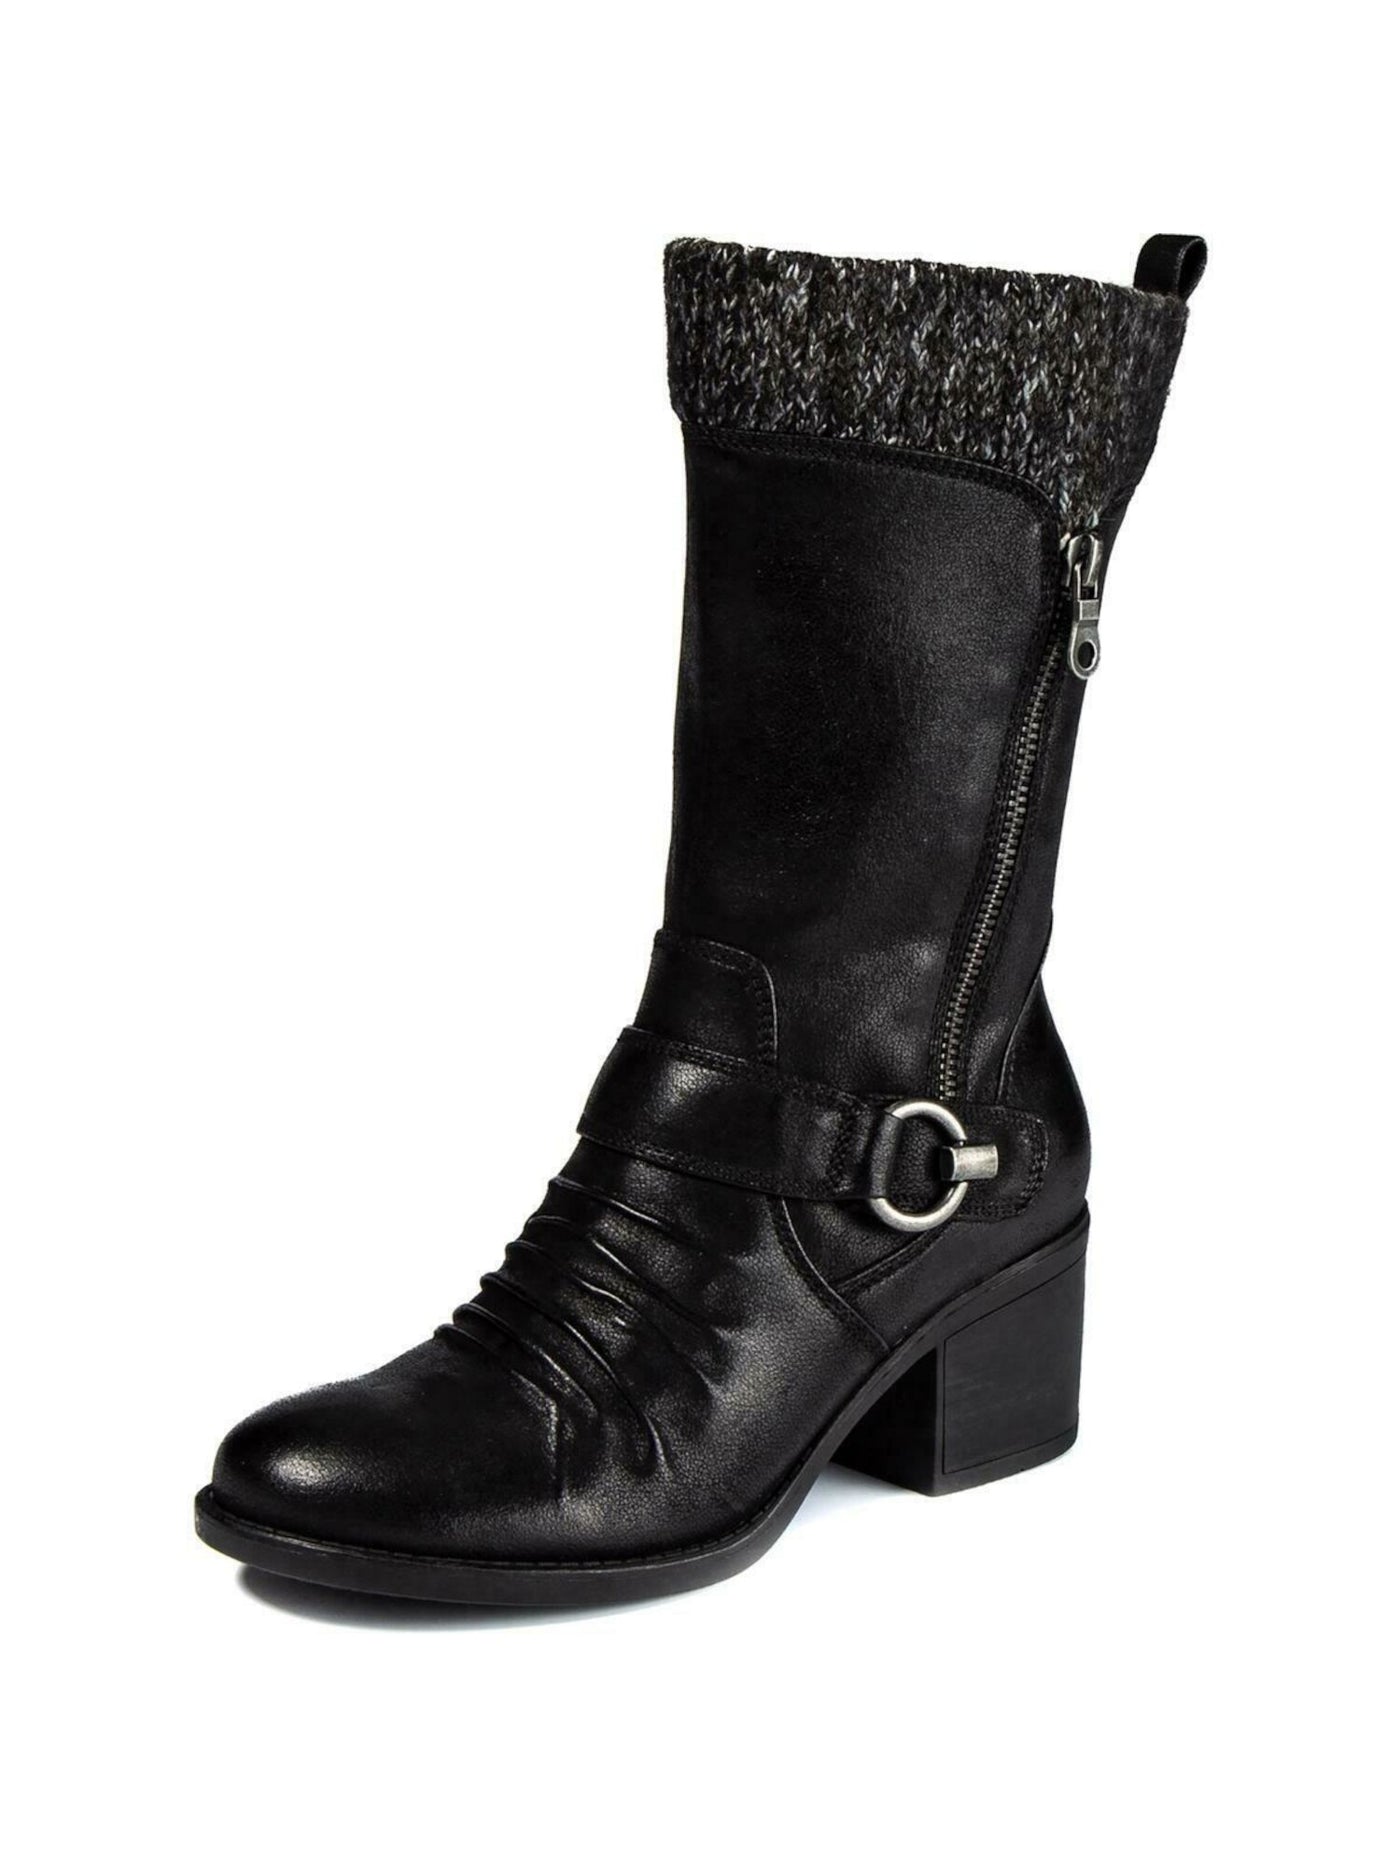 BARETRAPS Womens Black Padded Zipper Accent Sweater Collar Buckle Accent Ruched Wylla Round Toe Block Heel Zip-Up Boots Shoes M